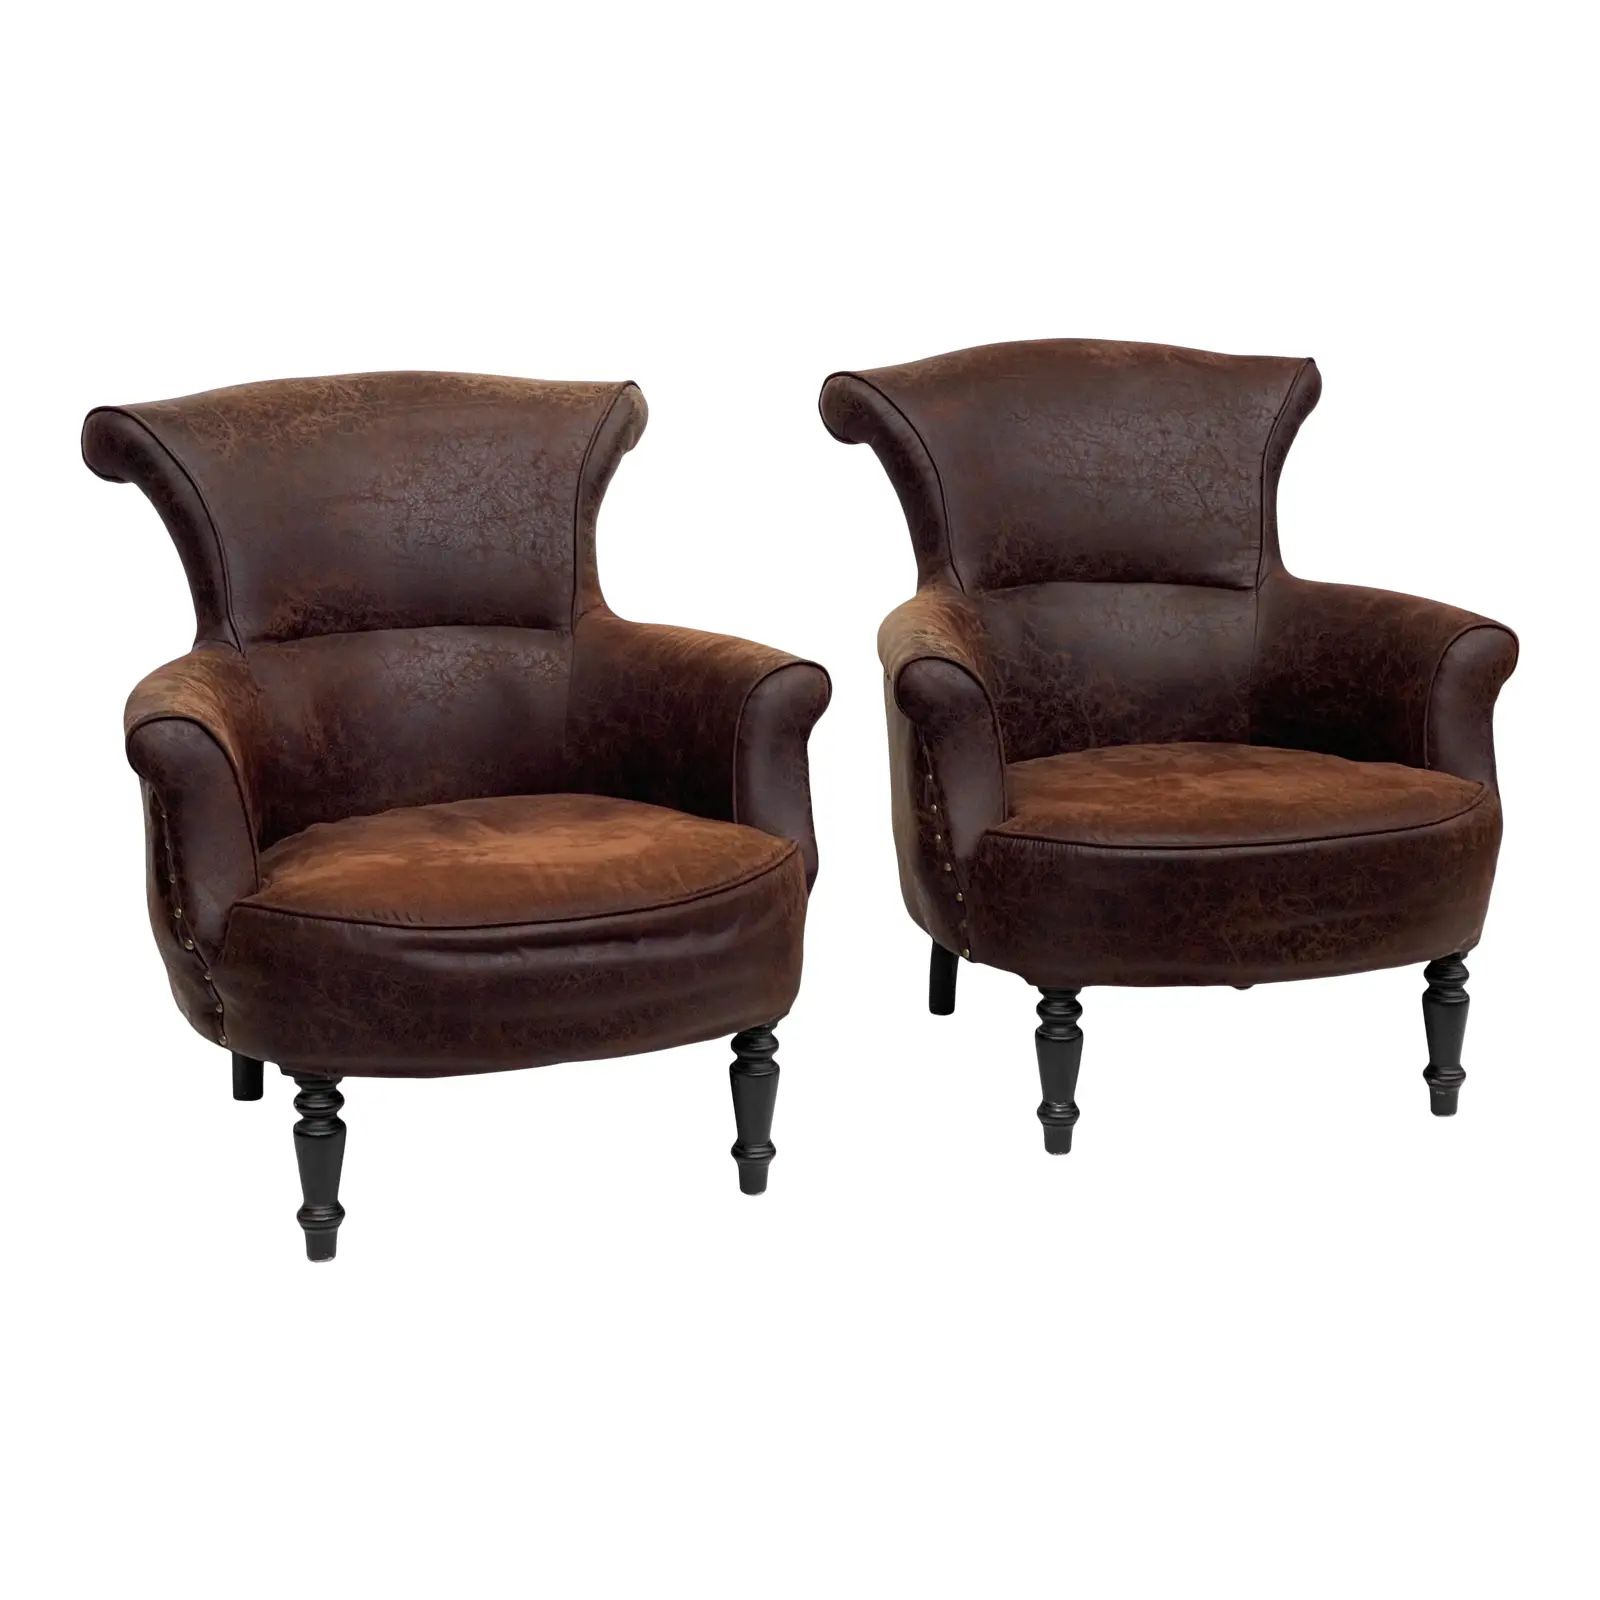 Ralph Lauren Style Distressed Leather Club Chairs, Pair | Chairish